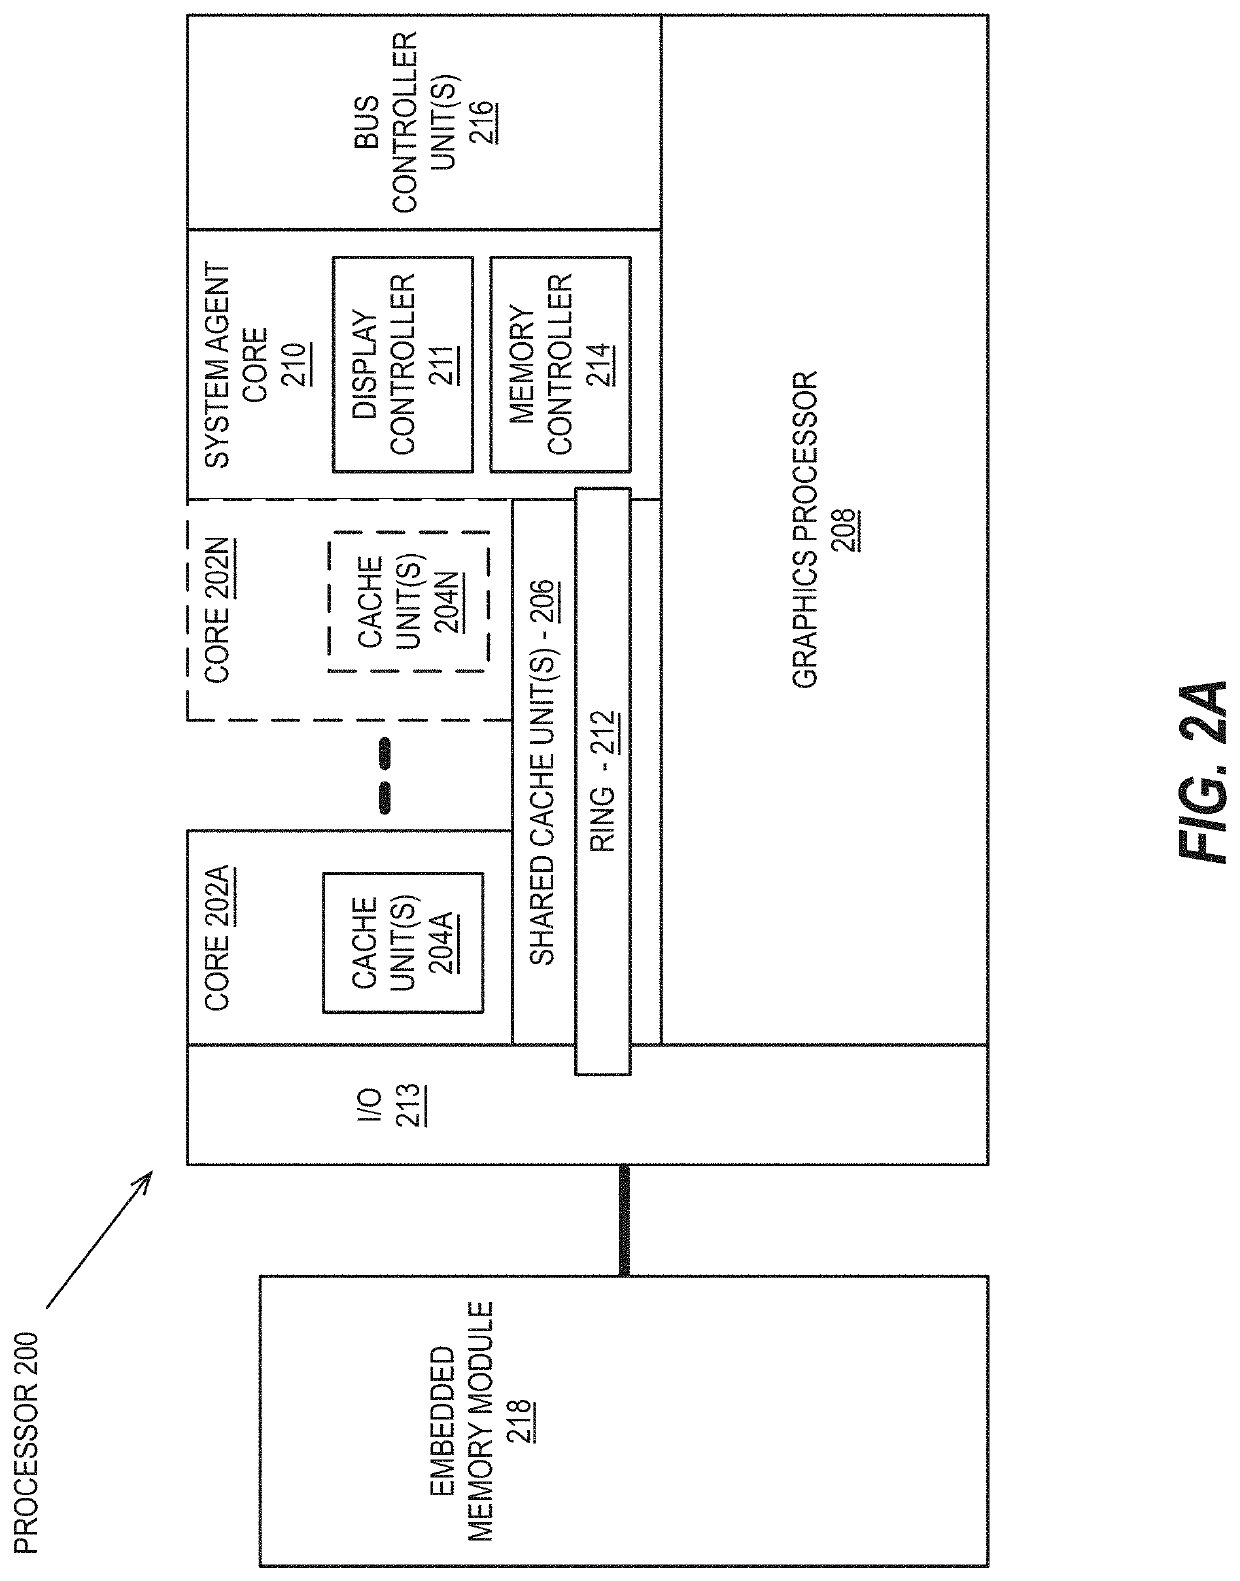 Variable width interleaved coding for graphics processing